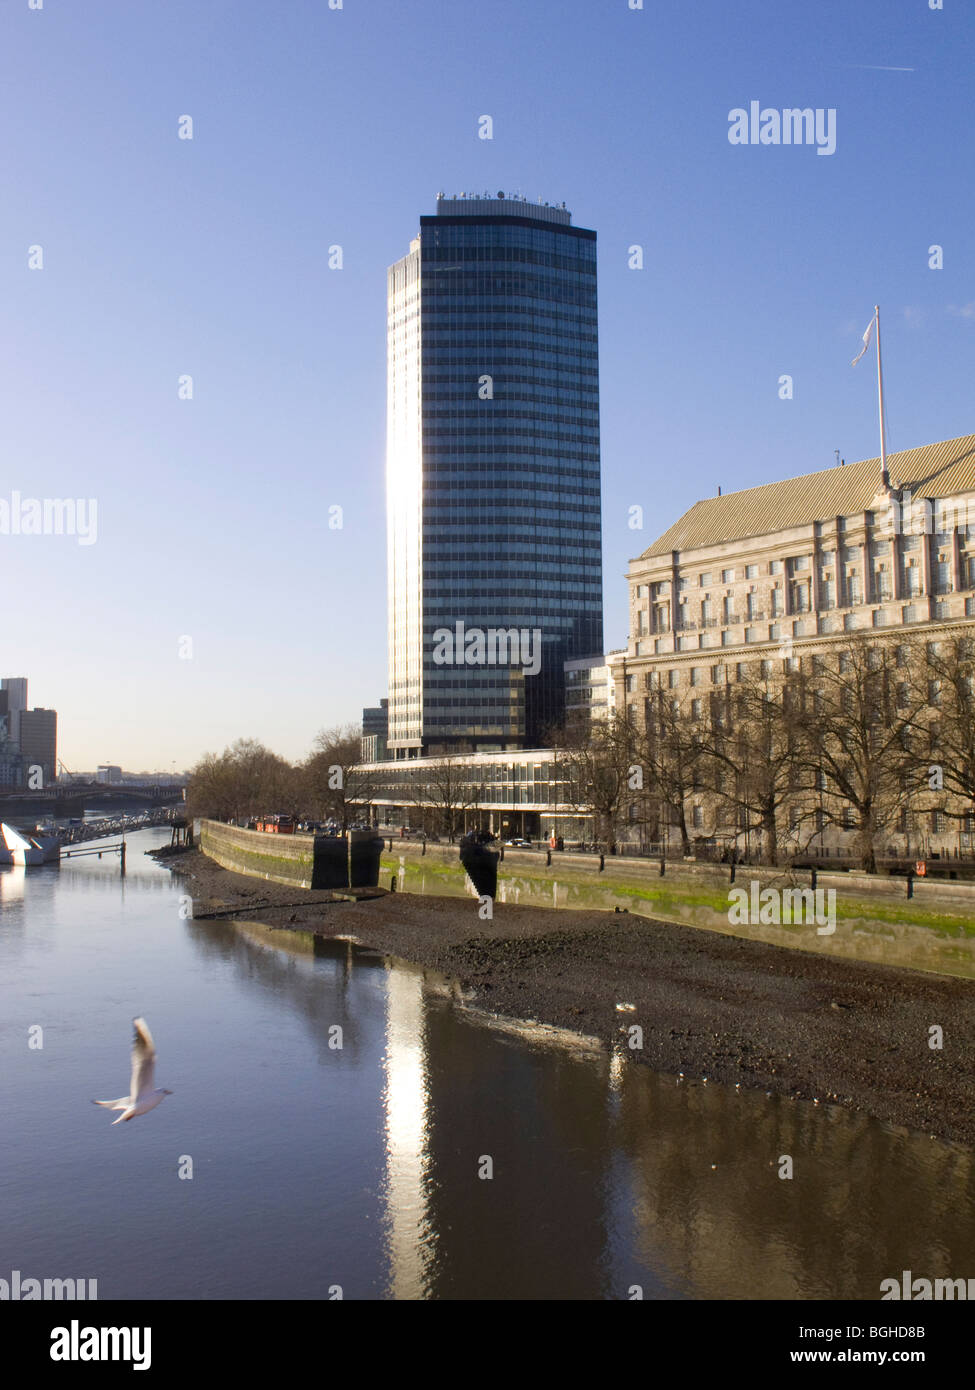 London Vickers building Millbank tower Thames and Thames house Stock Photo